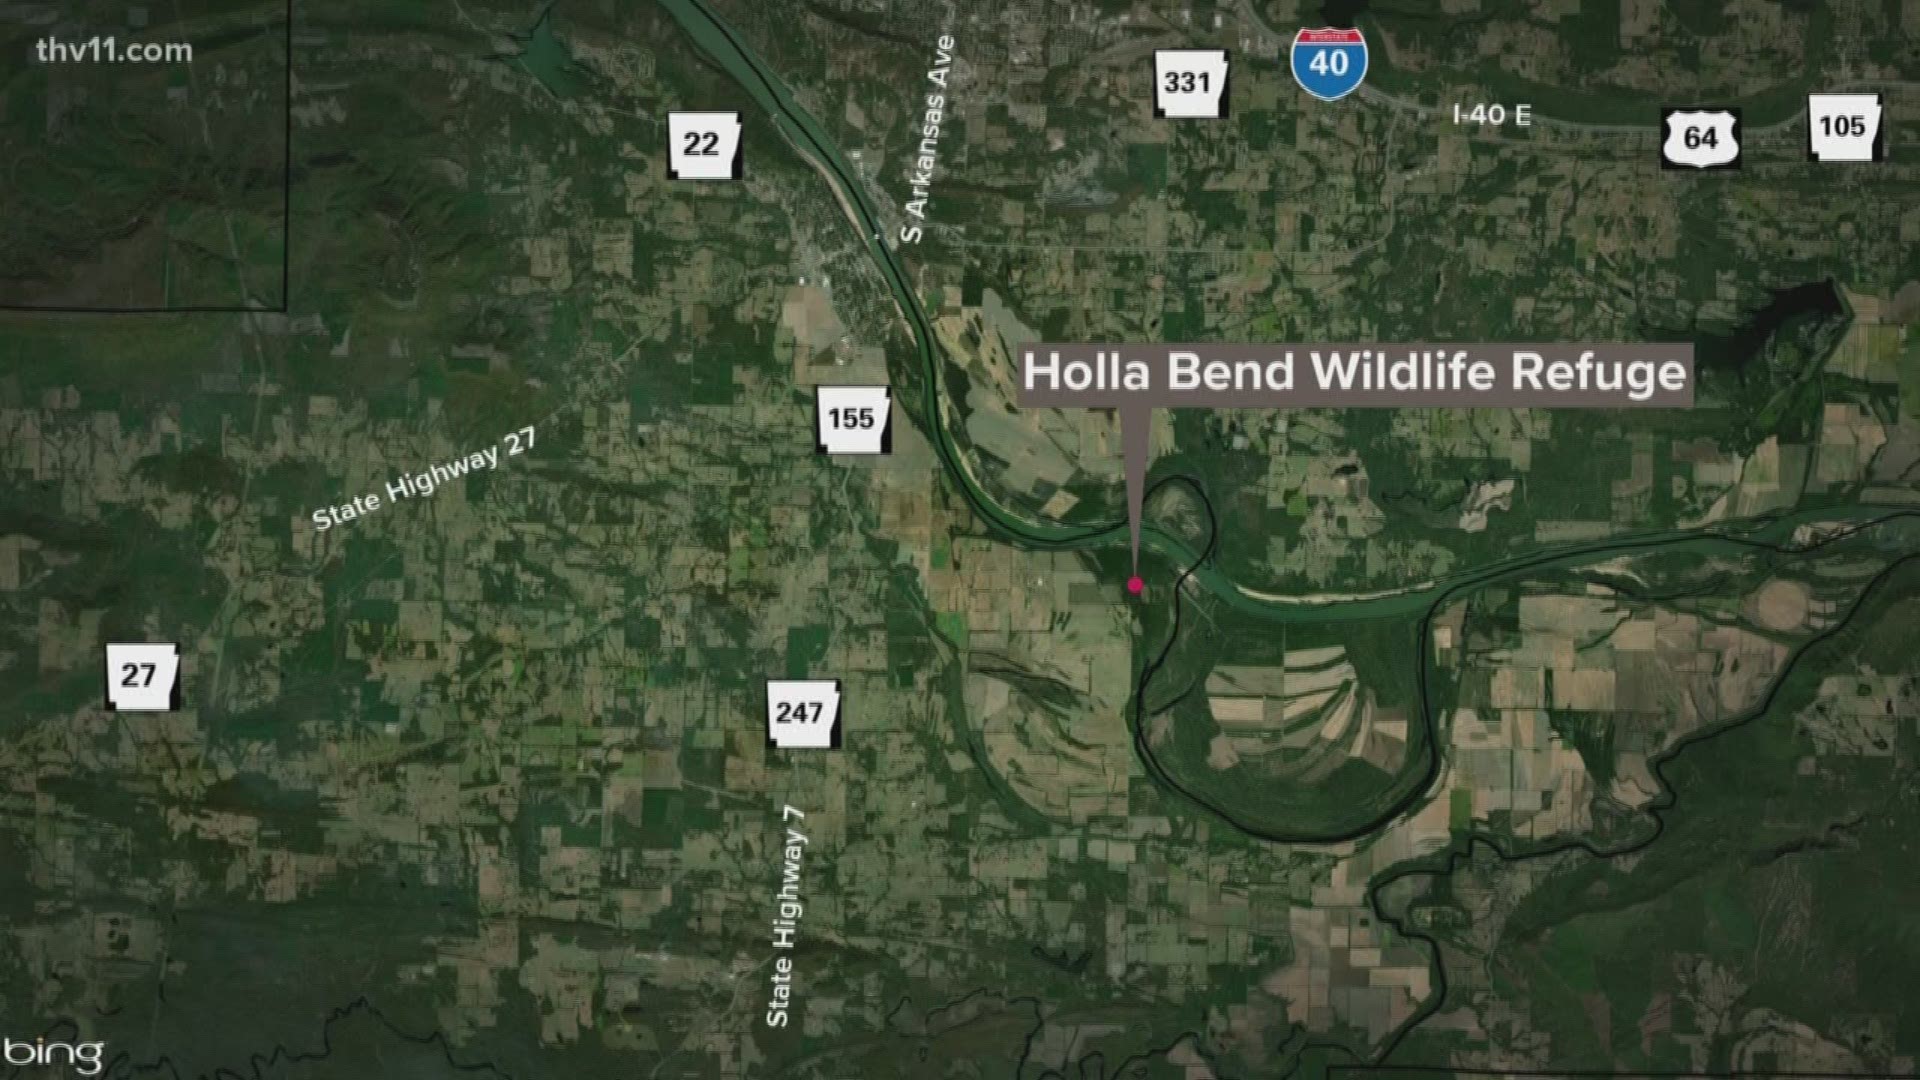 A levee in Holla Bend National Wildlife Refuge has breached.